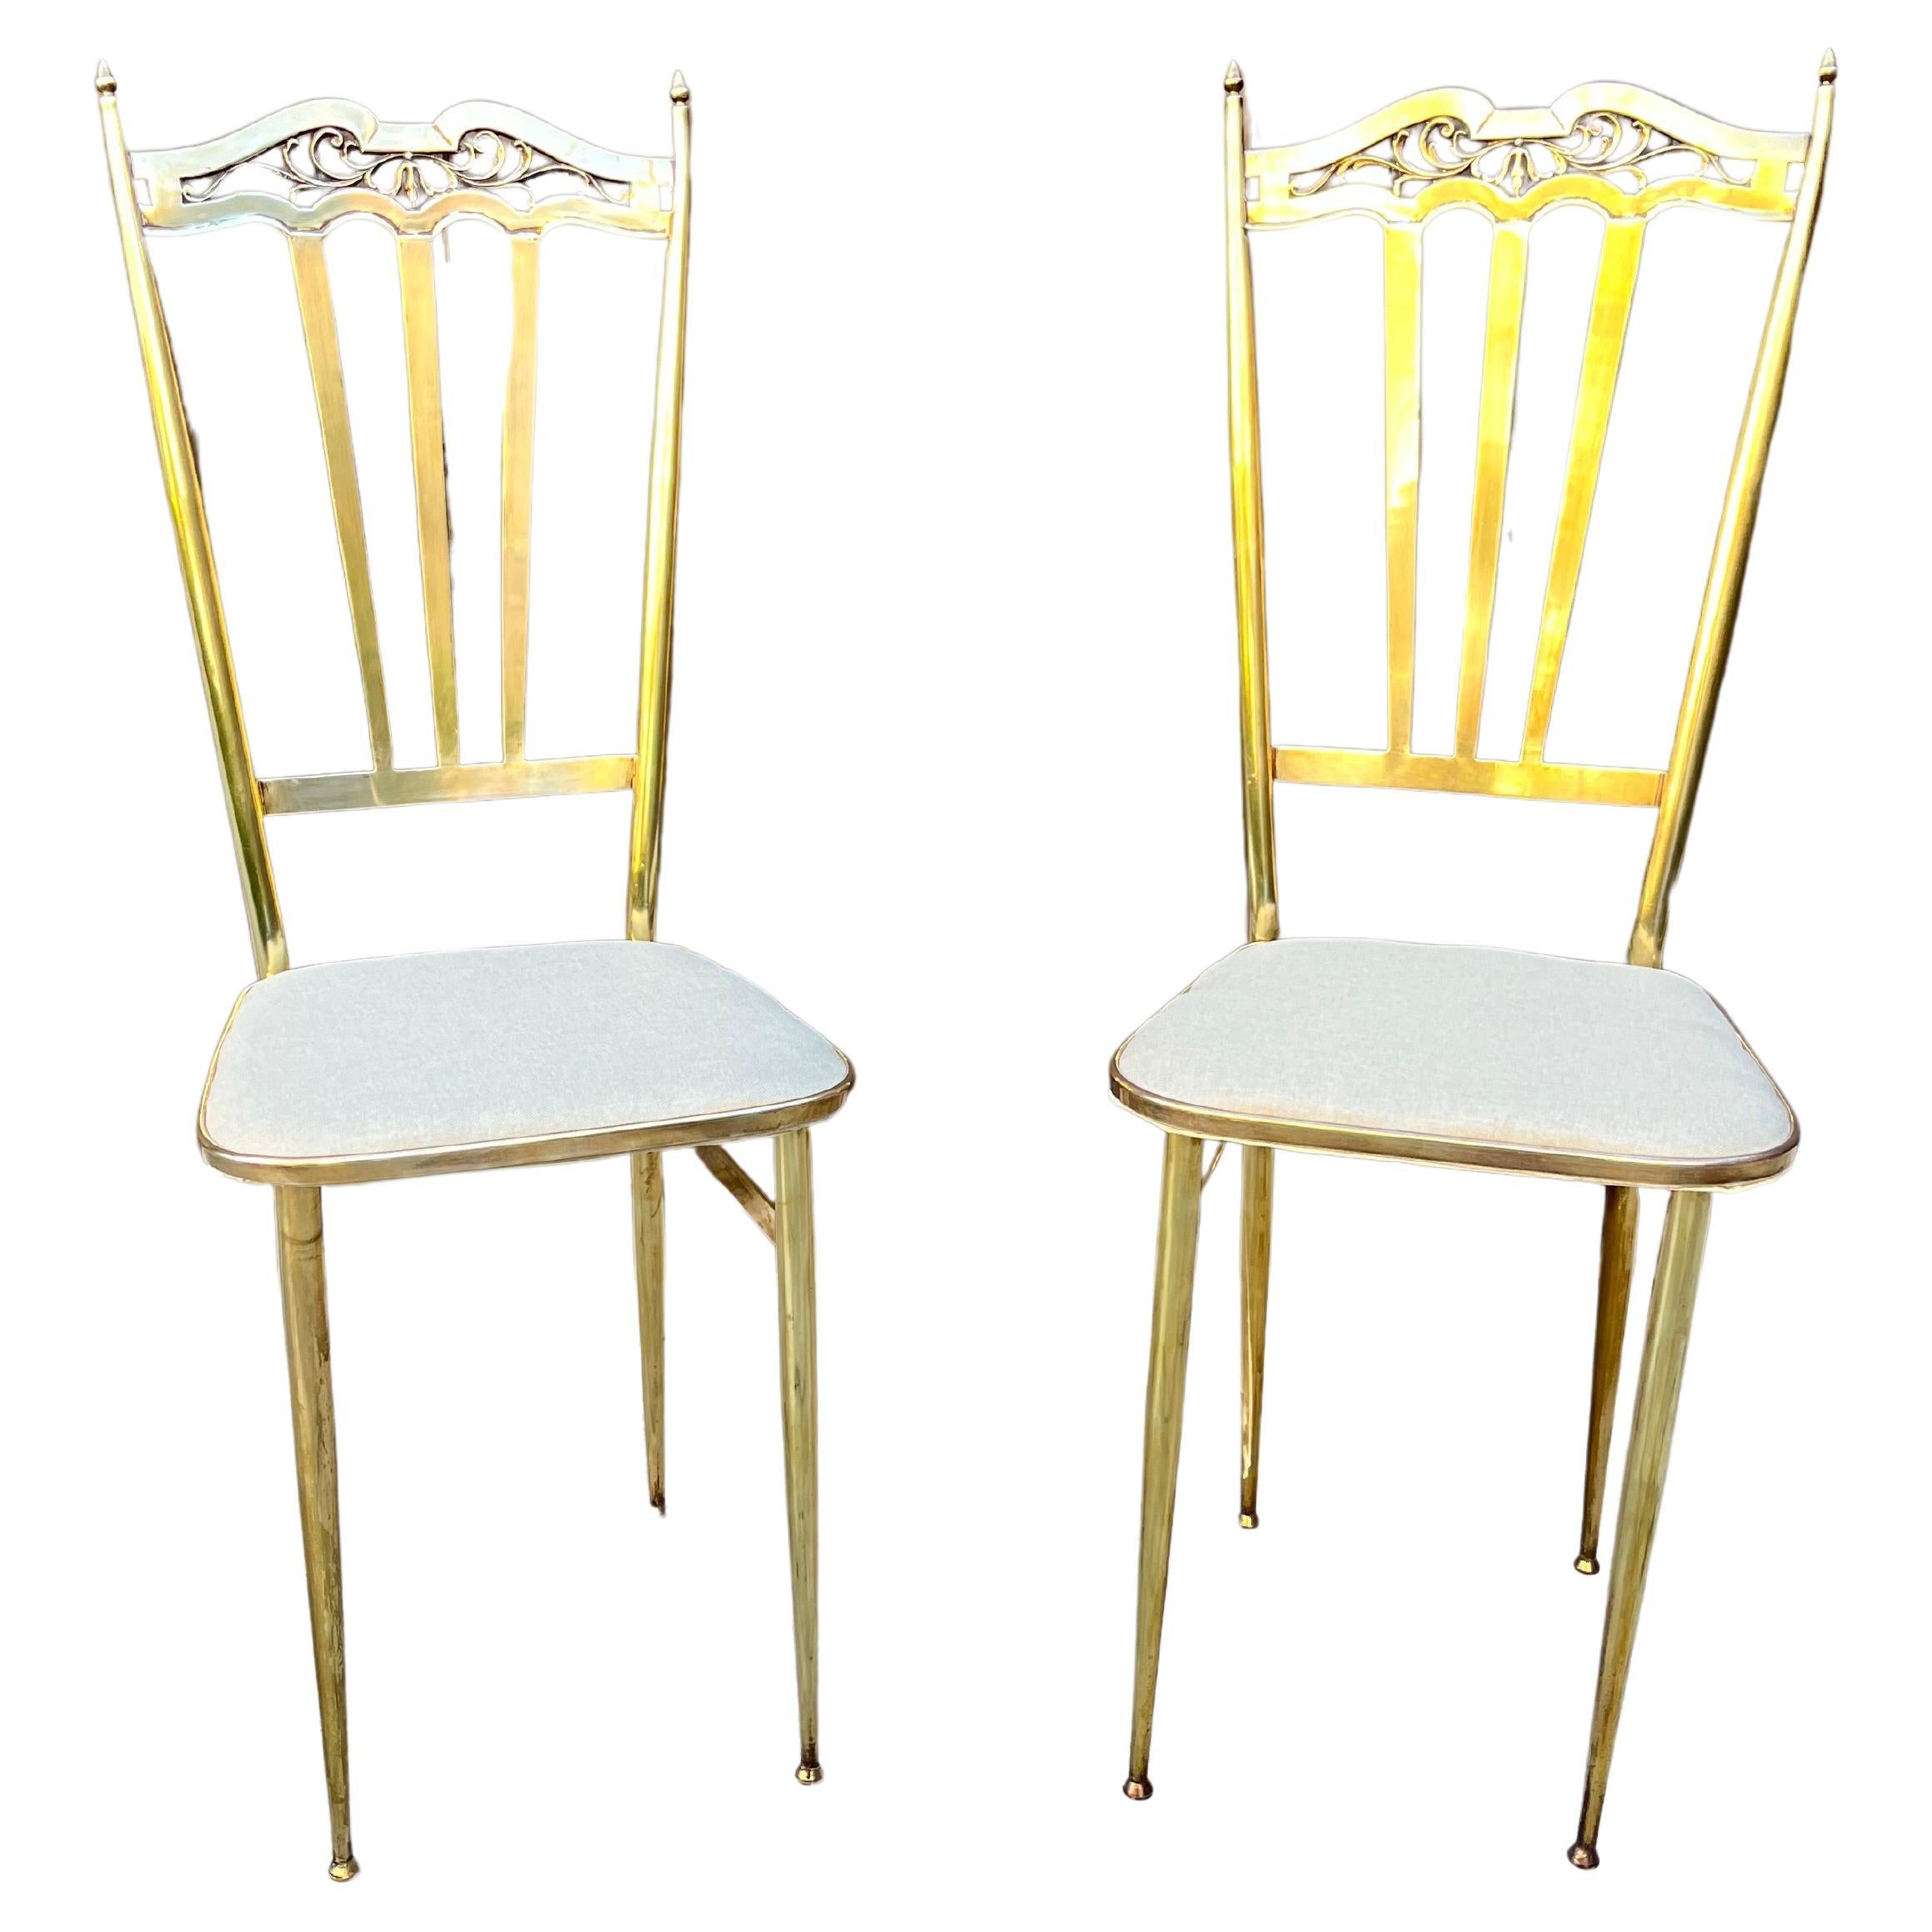 Set of 2 Mid-Century Brass Chairs Italian Design 1960s For Sale